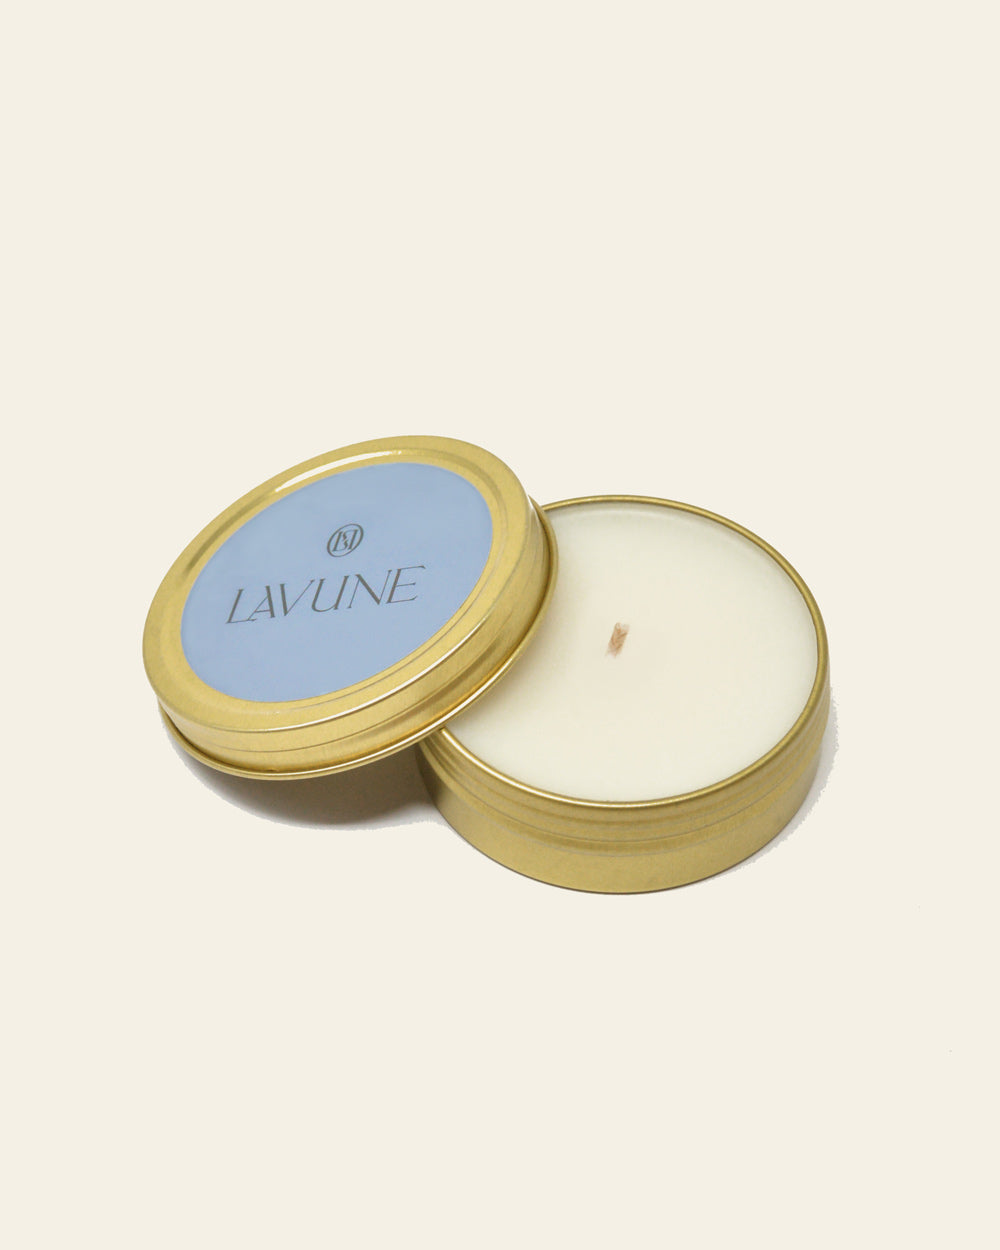 2 OZ TRAVEL CANDLE - Lavune